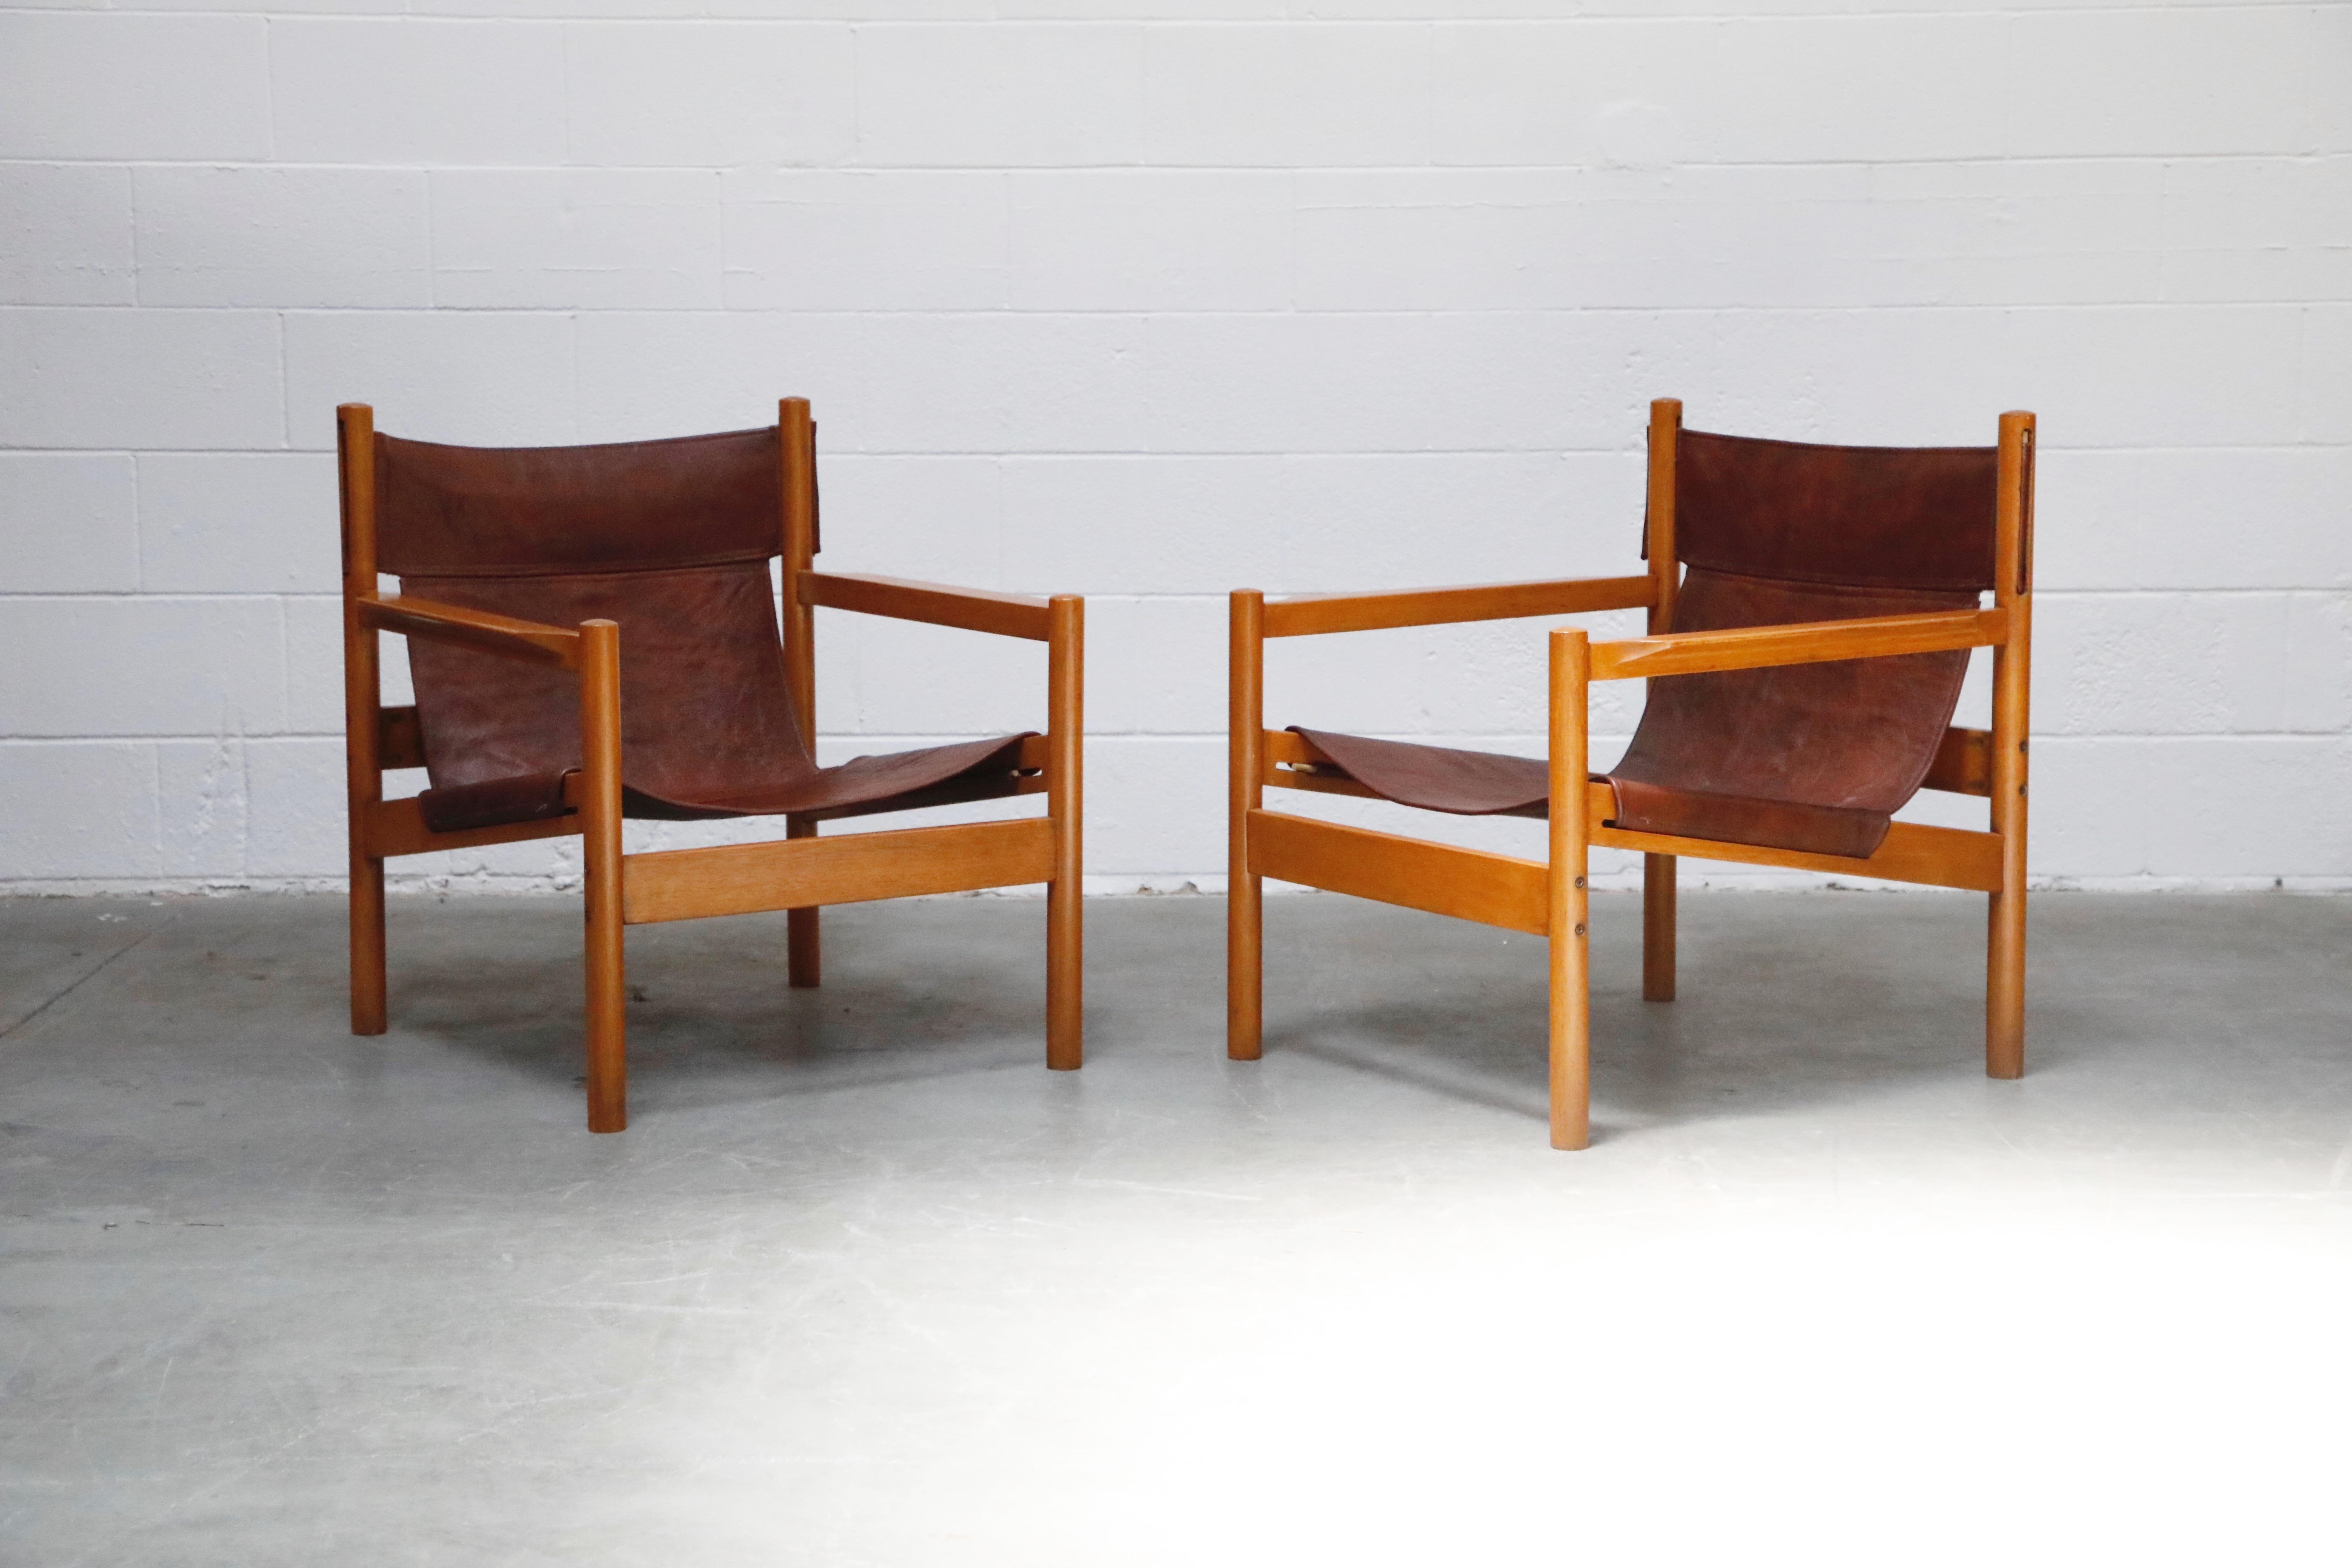 This incredible pair of 'Roxinho' safari style lounge chairs by Michel Arnoult, circa 1960s Brazil, feature stitched leather sling seats and seat backs, with Brazilian hardwood frames. Such casual refinement, perfect for a laid-back look while